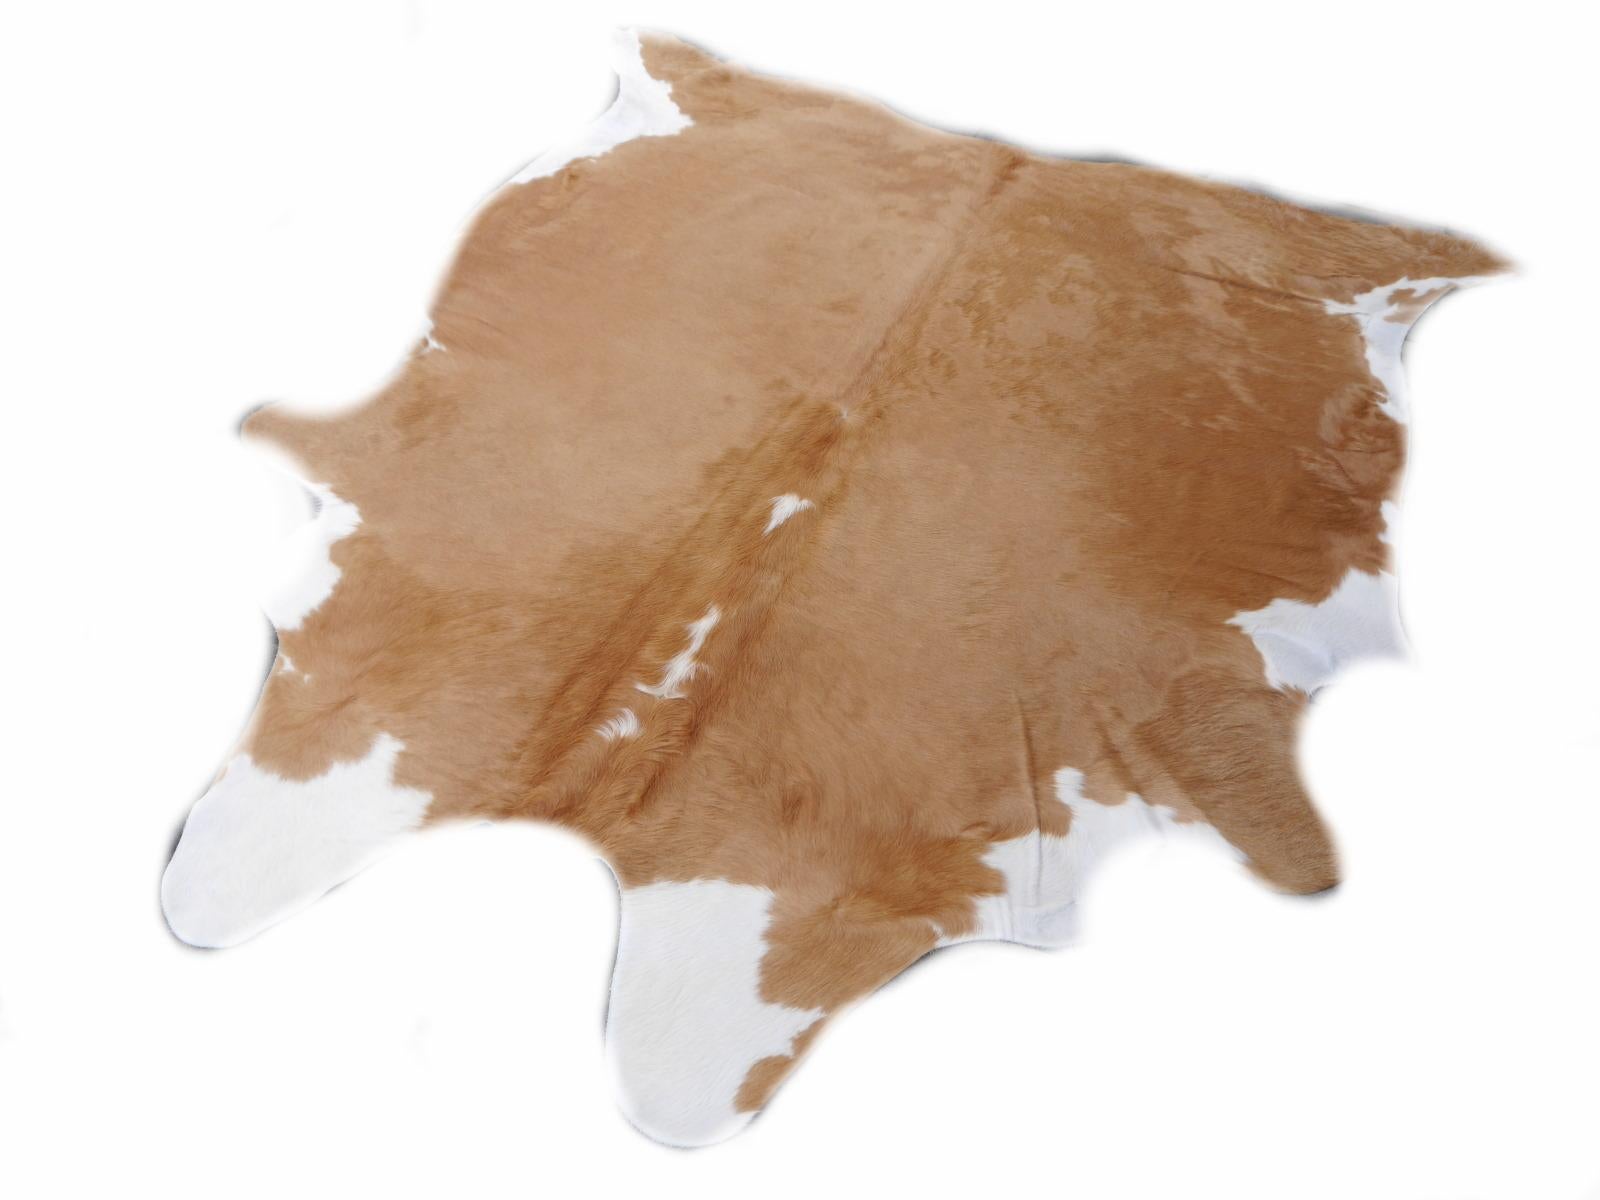 Large cowhide rug brown

Our premium cowhides are of excellent quality, all hand selected. They go great with many decor styles such as South Western, Industrial, midcentury, Hollywood Regency and contemporary modern. All our cowhide rugs are